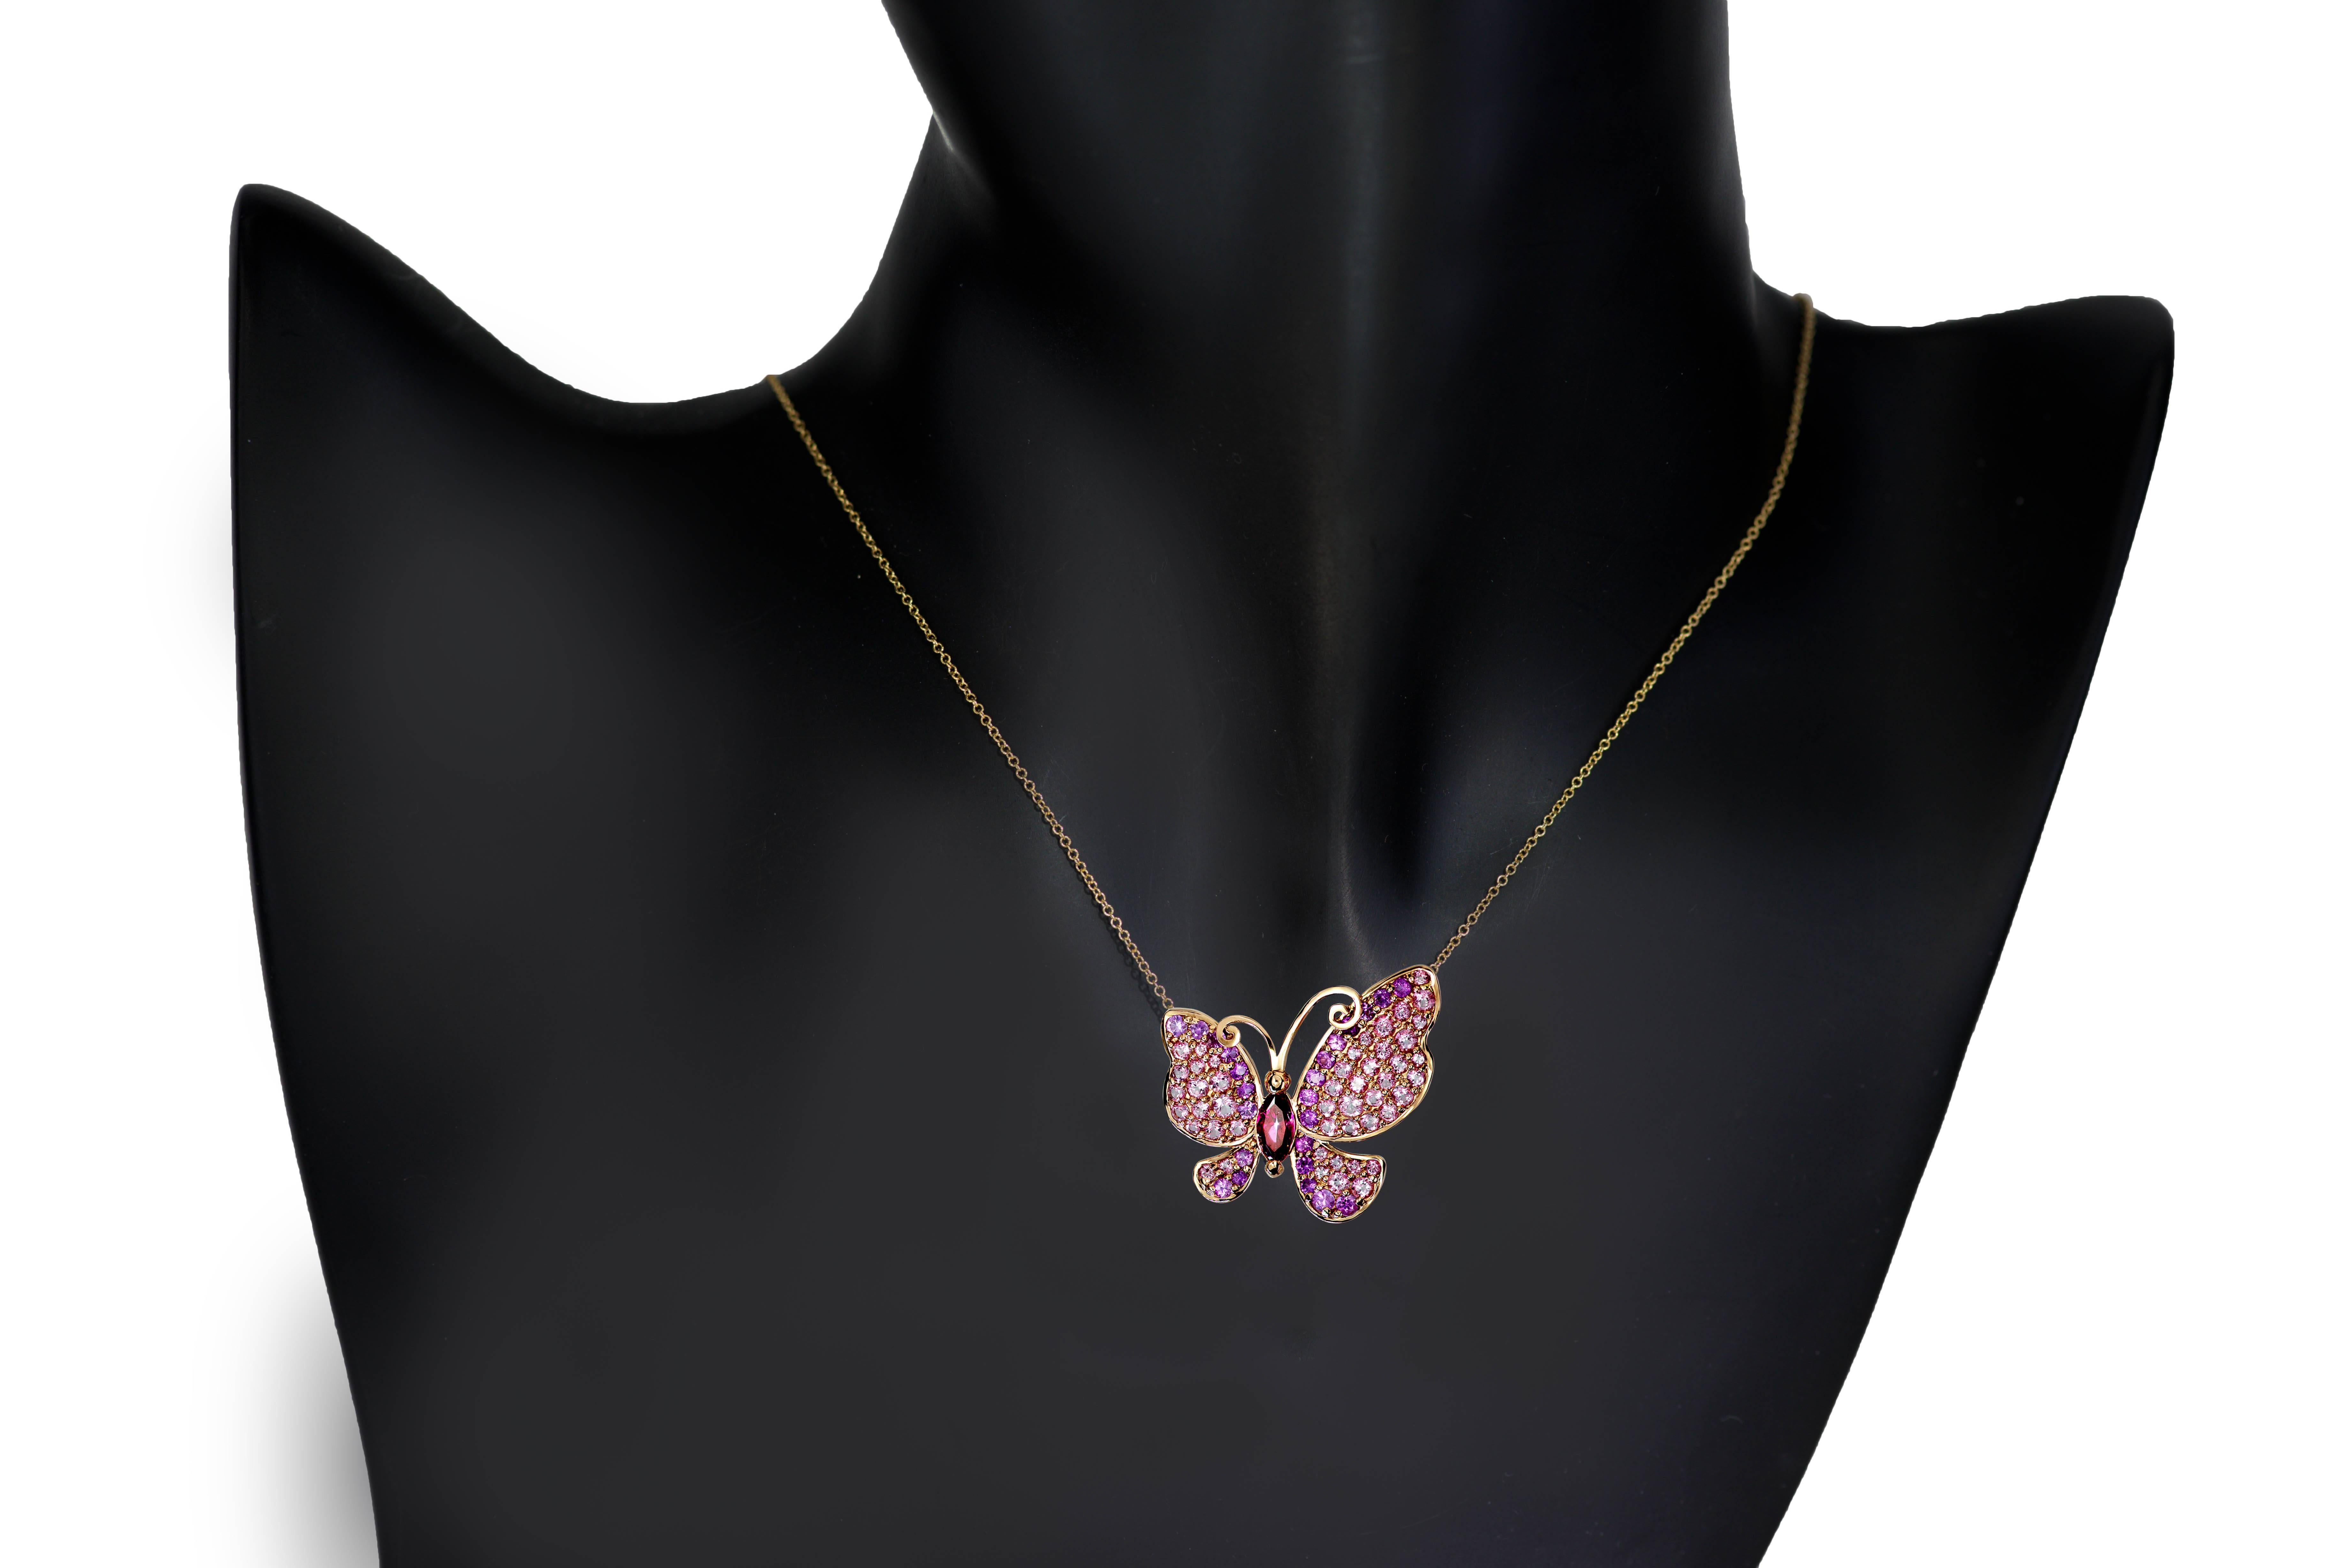 Alex Soldier's Butterfly collection is dedicated to celebration of life. Butterflies remind us to enjoy the moment and embrace change. This lovely butterfly pin is made in 18 karat rose gold with 3.1 carats of pink topaz and 1.5 carats of pink